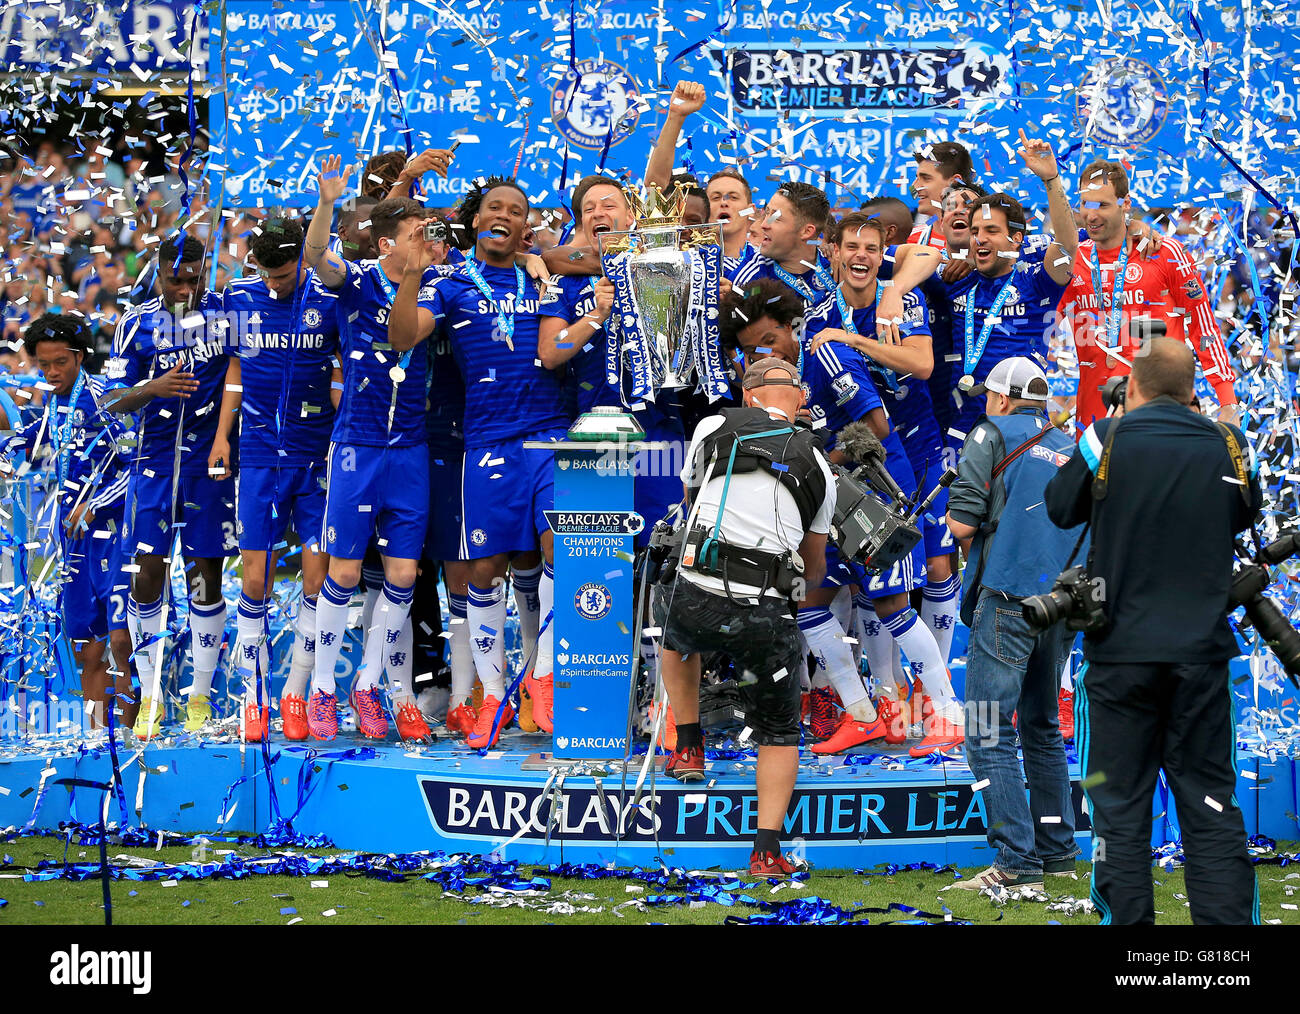 Soccer - Barclays Premier League - Chelsea v Sunderland - Stamford Bridge. Chelsea players celebrate with the trophy after the Barclays Premier League match at Stamford Bridge, London. Stock Photo